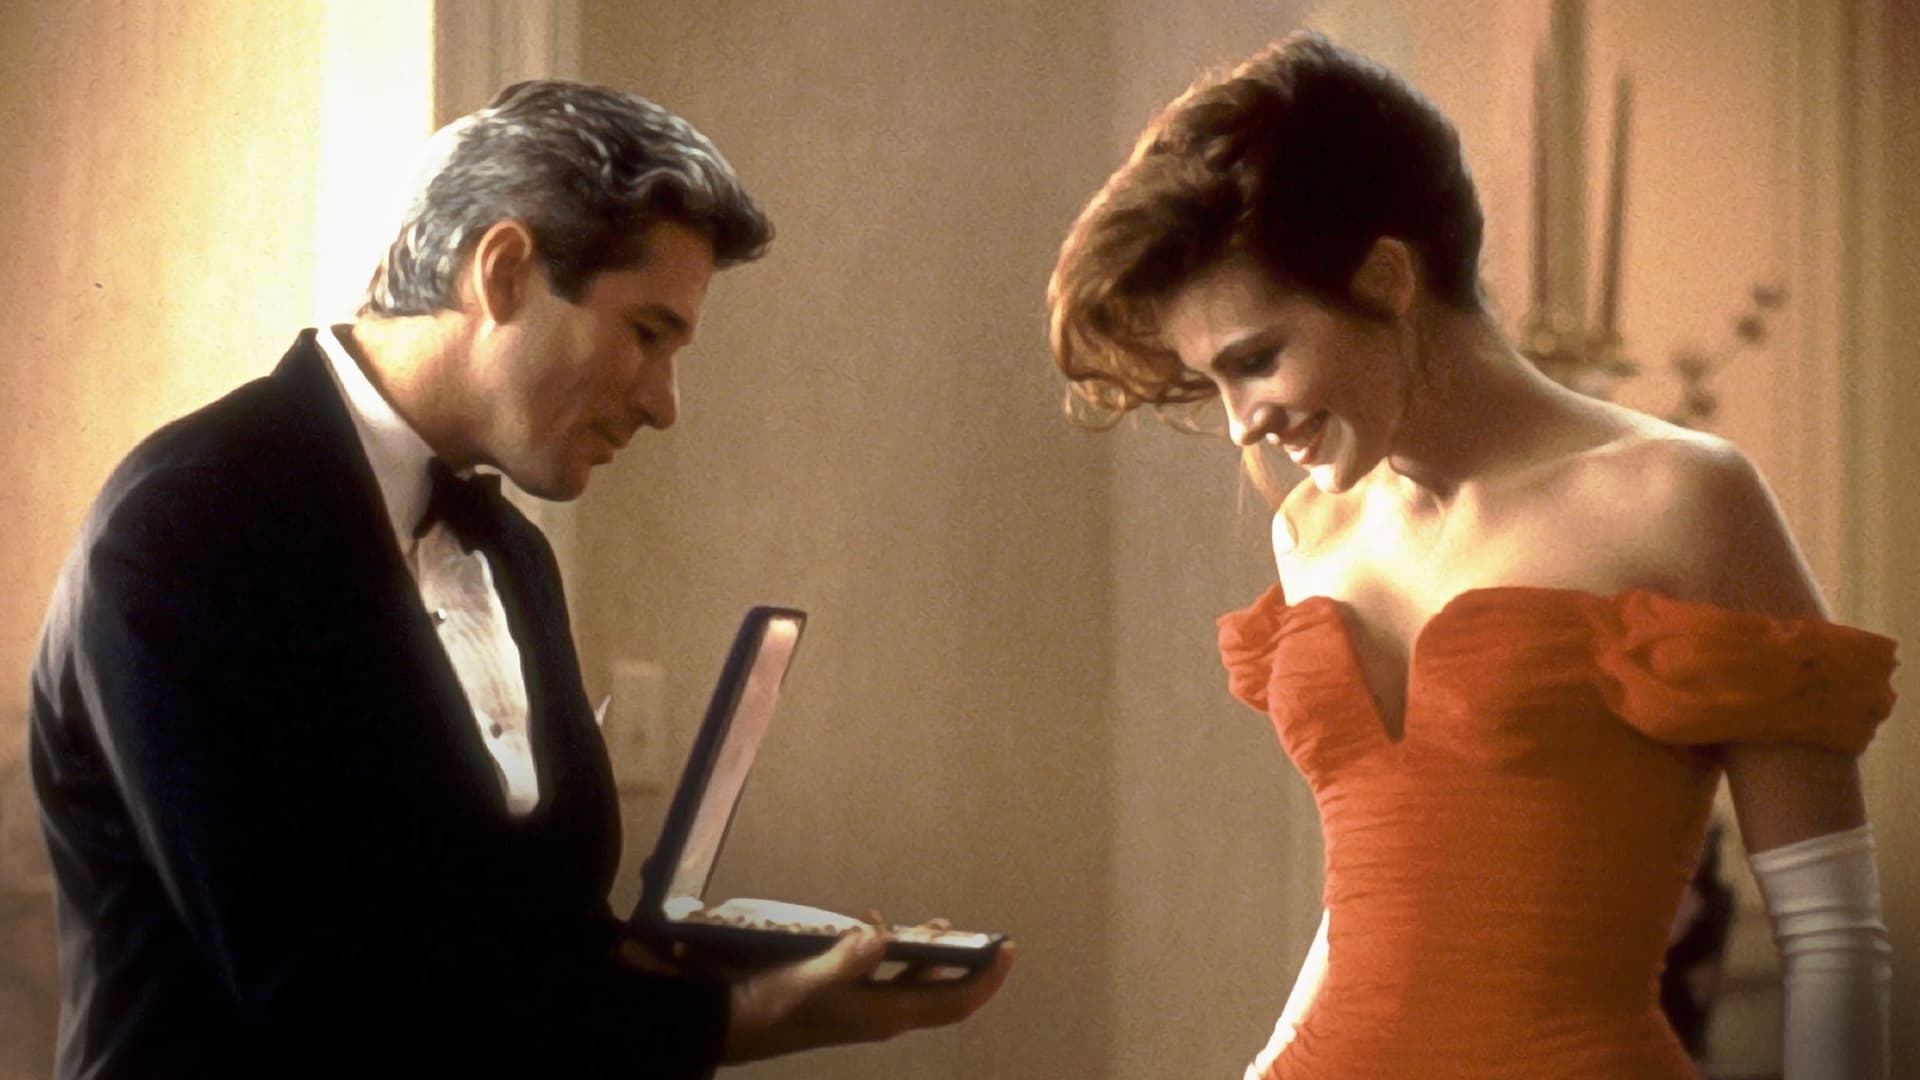 Pretty Woman (Movie): The romantic comedy about a lovelorn corporate raider and a sweet, wholesome streetwalker from Hollywood Boulevard. 1920x1080 Full HD Wallpaper.